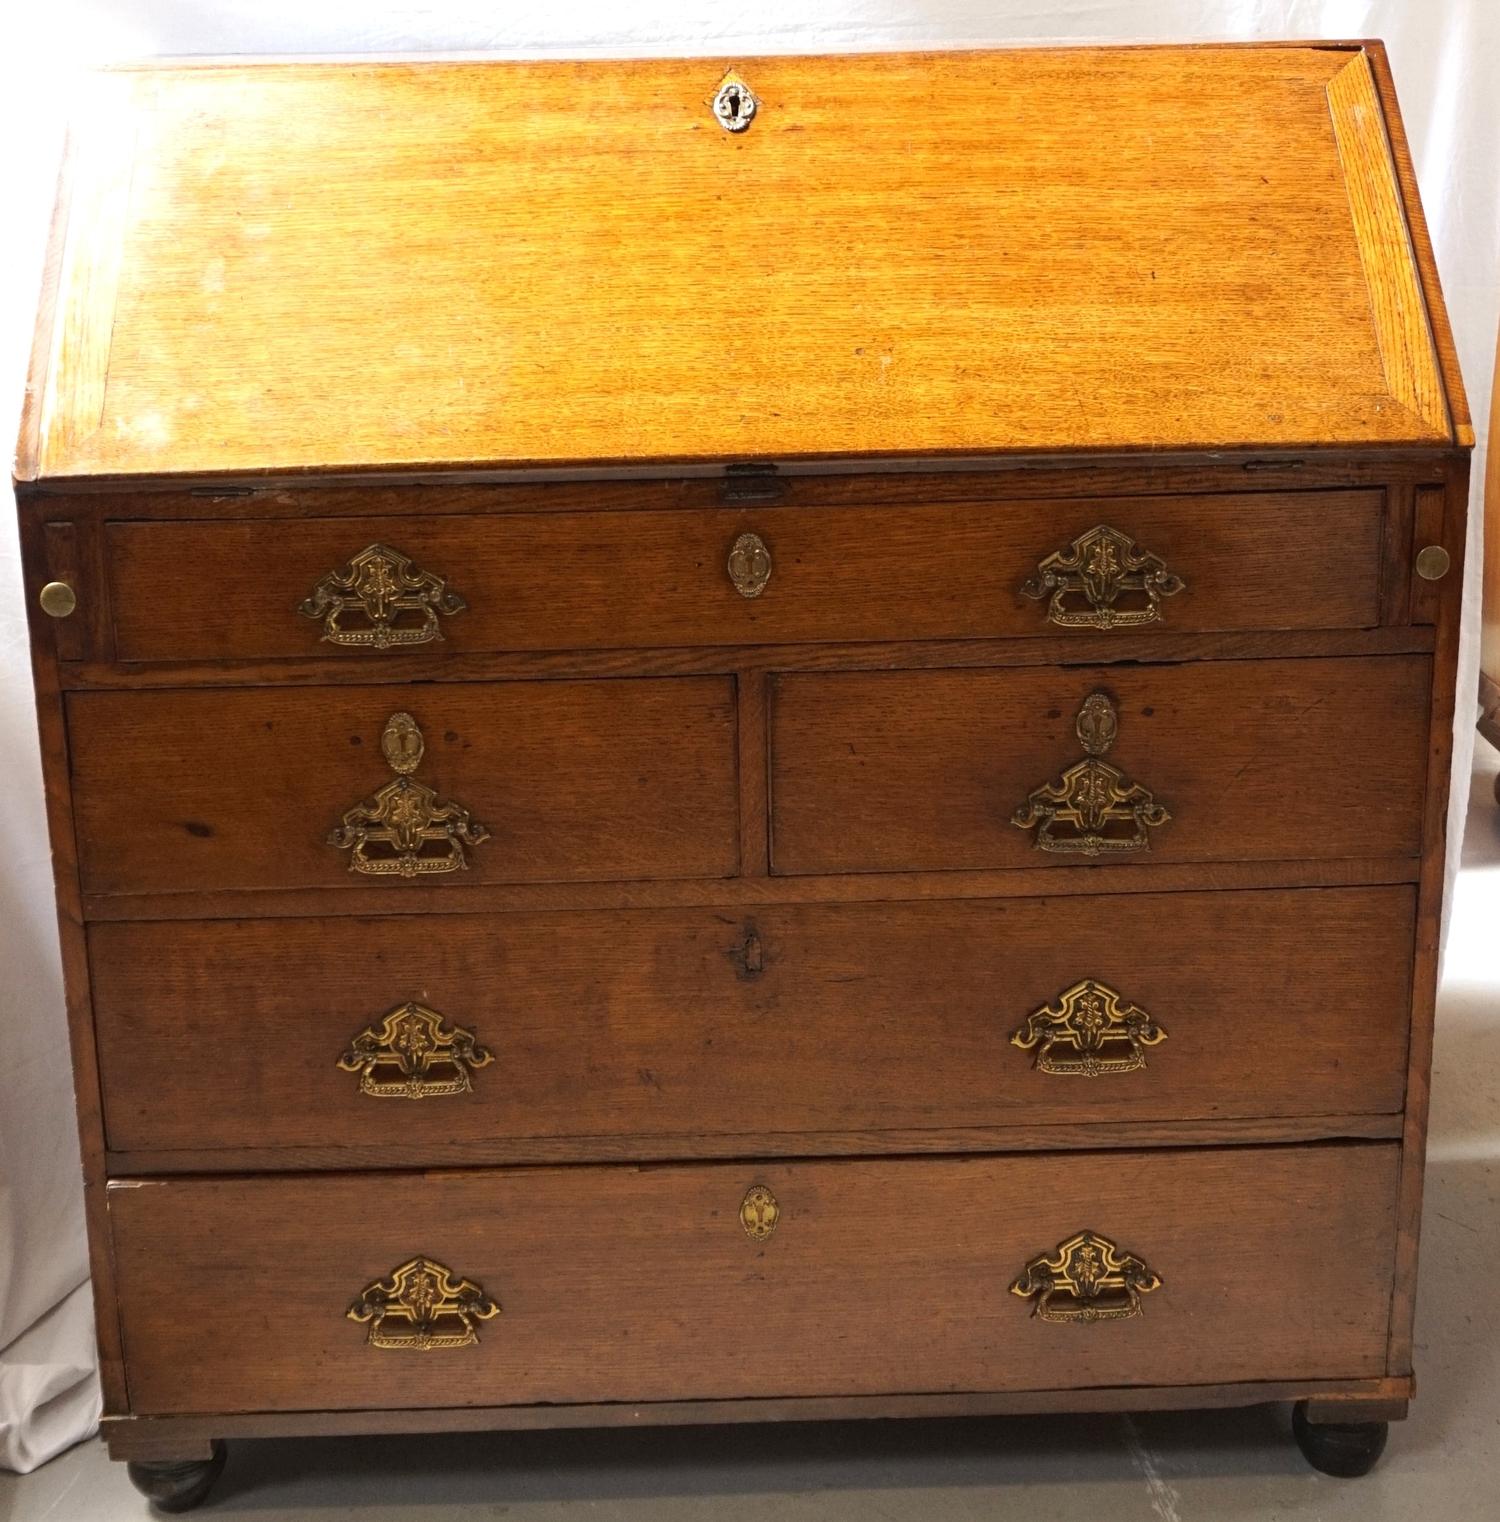 LATE 18th CENTURY OAK BUREAU with a fall flap revealing a fitted interior of drawers and pigeon